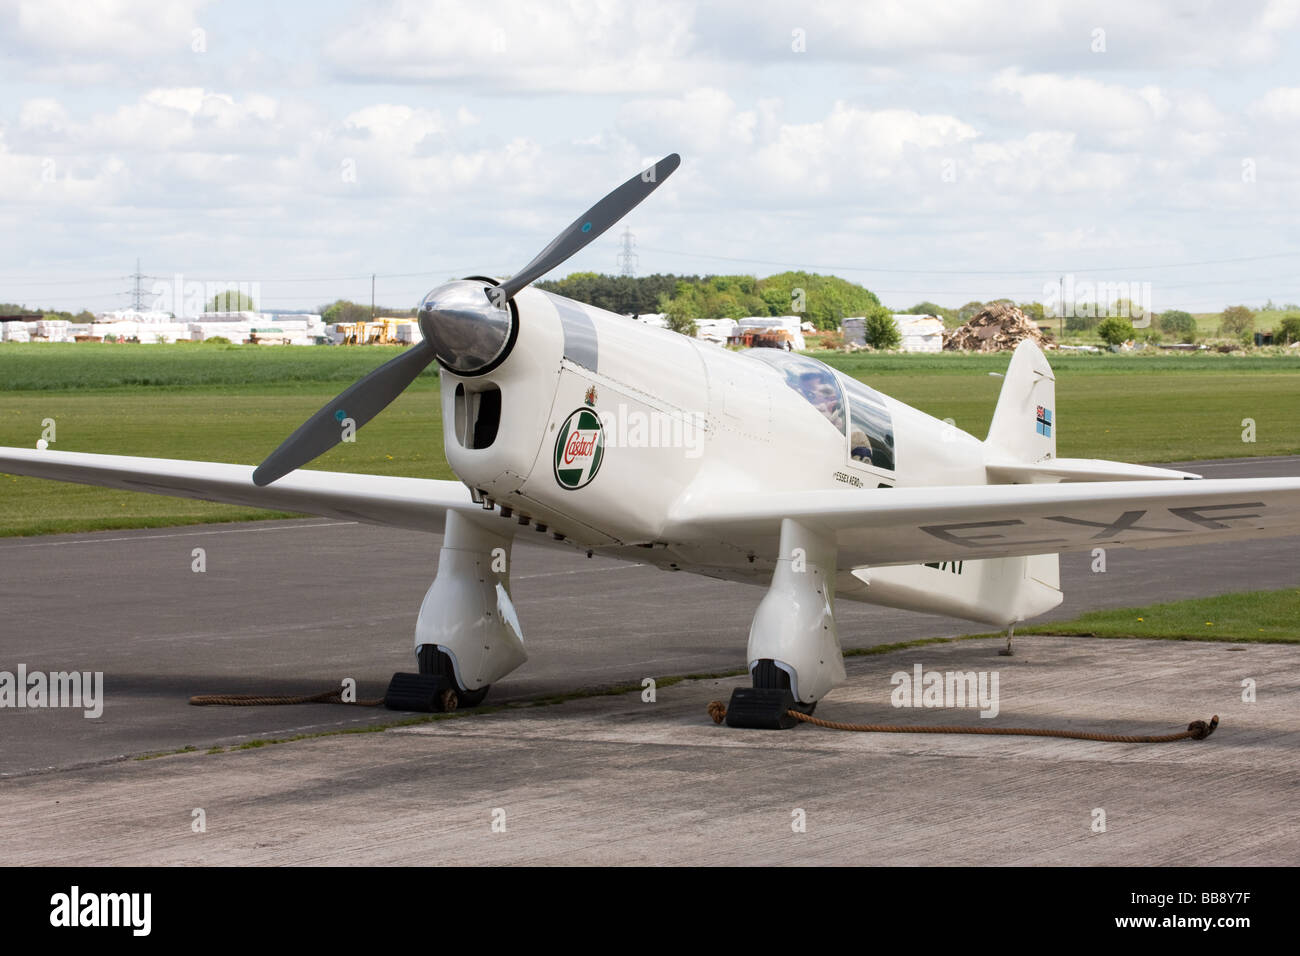 Percival Mew Gull G-AEXF parked at Breighton Airfield Stock Photo